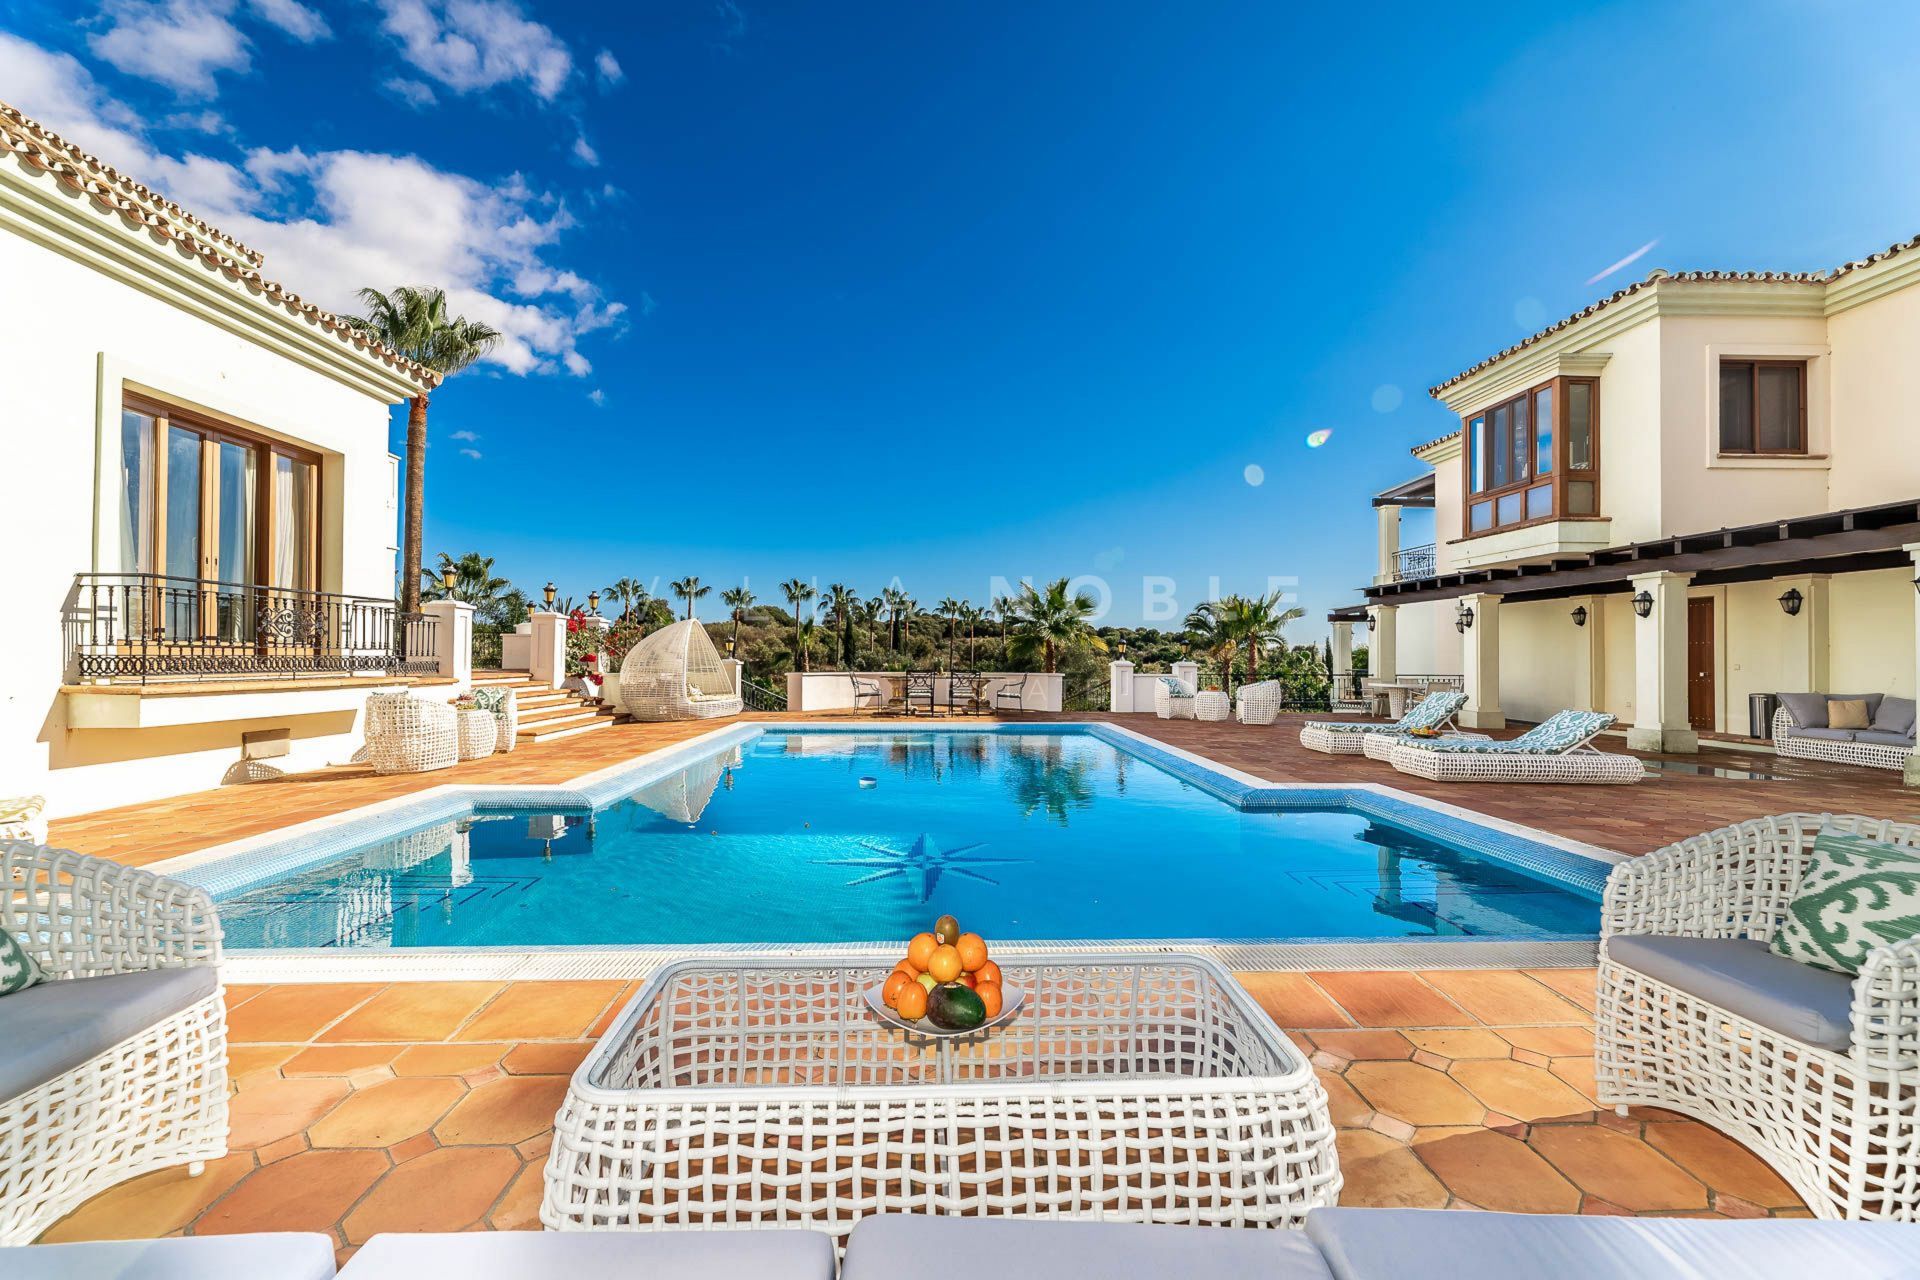 Luxury Mediterranean Palace with 16 bedrooms at El Paraiso Alto, Benahavis, surrounded by the best golf courses